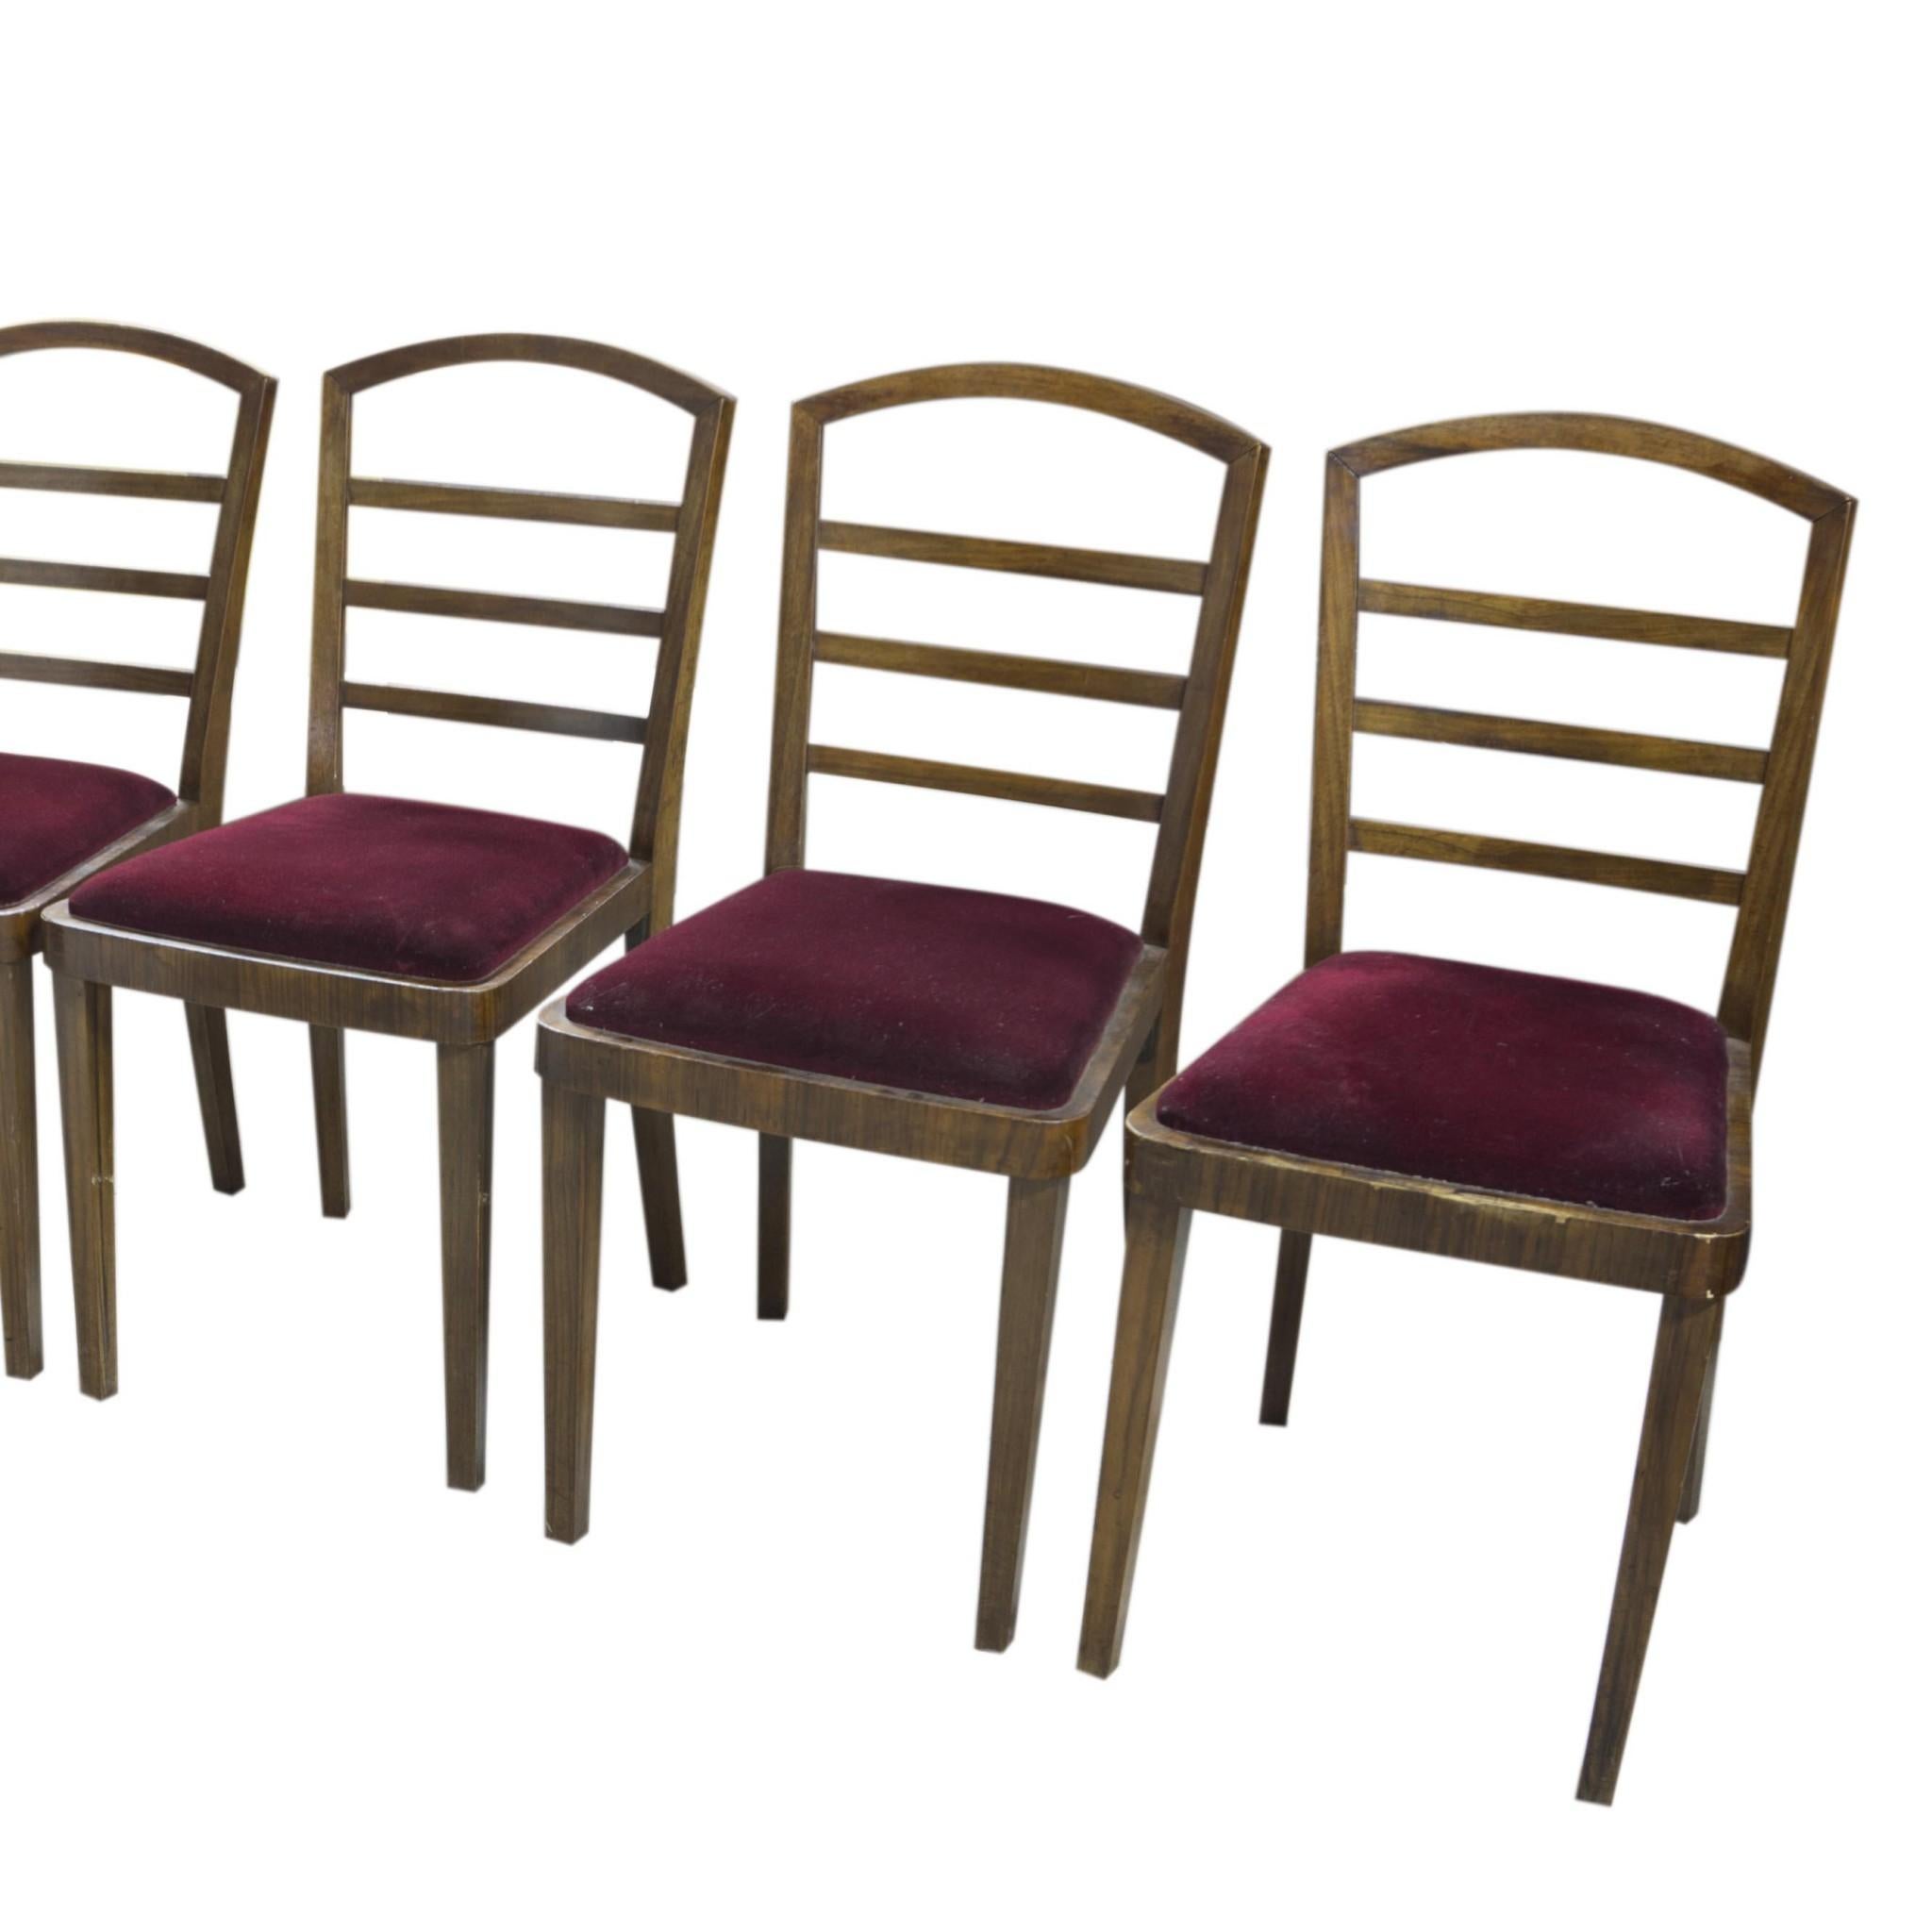 Set of six chairs Art Deco designed by Vlastmil Brožek, circa 1930´s, Czechoslovakia. Construction of massive wood. Walnut veneer. Preserved condition. In a few places a small chip of veneer. Dark red velvet, the upholstery in good preserved